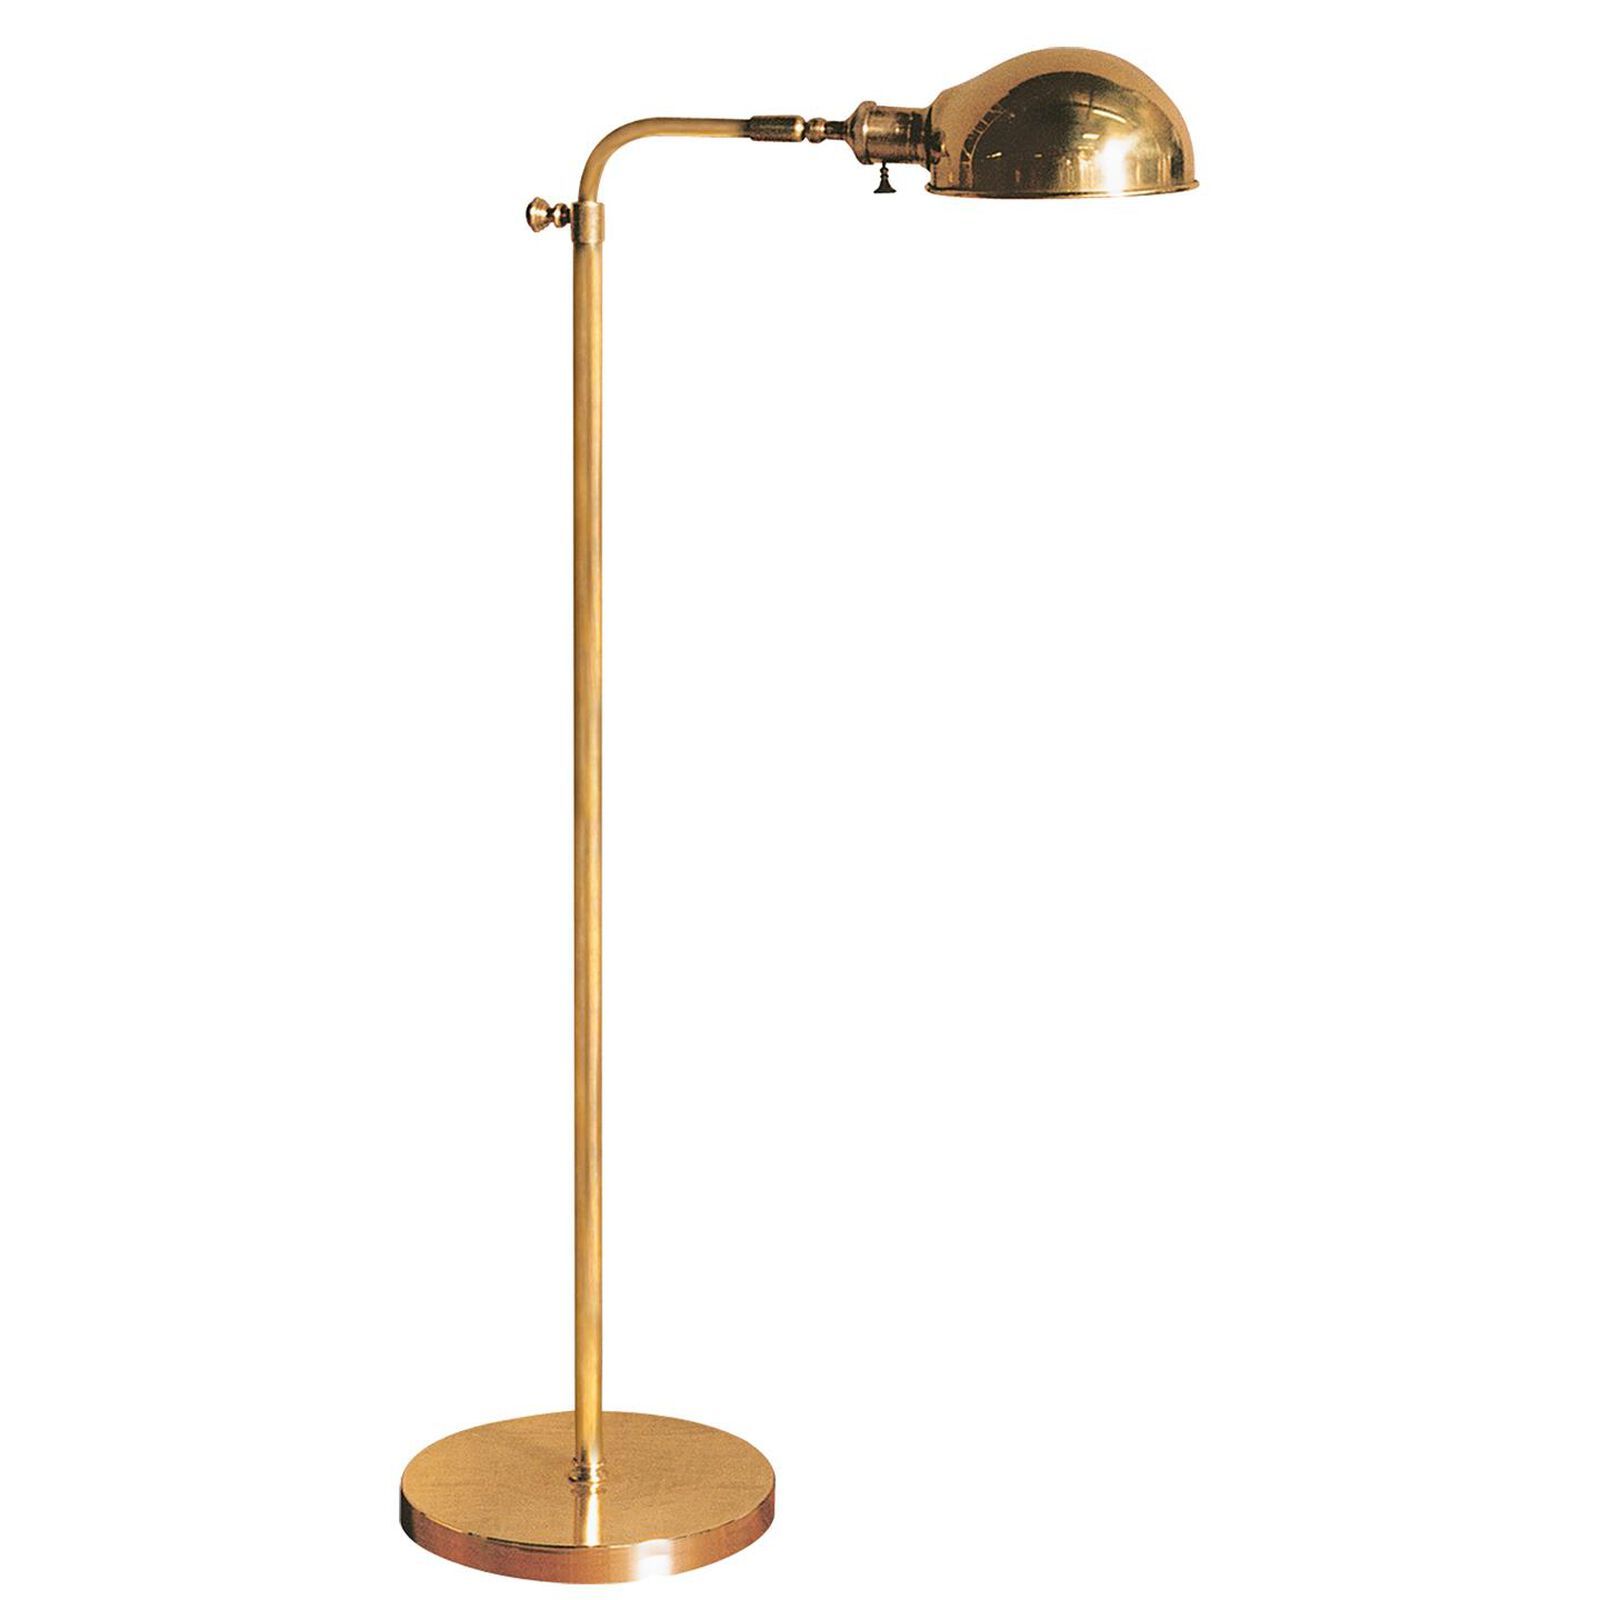 Studio Vc Old Pharmacy Floor 36 Inch Reading Lamp by Visual Comfort and Co. | Capitol Lighting 1800lighting.com